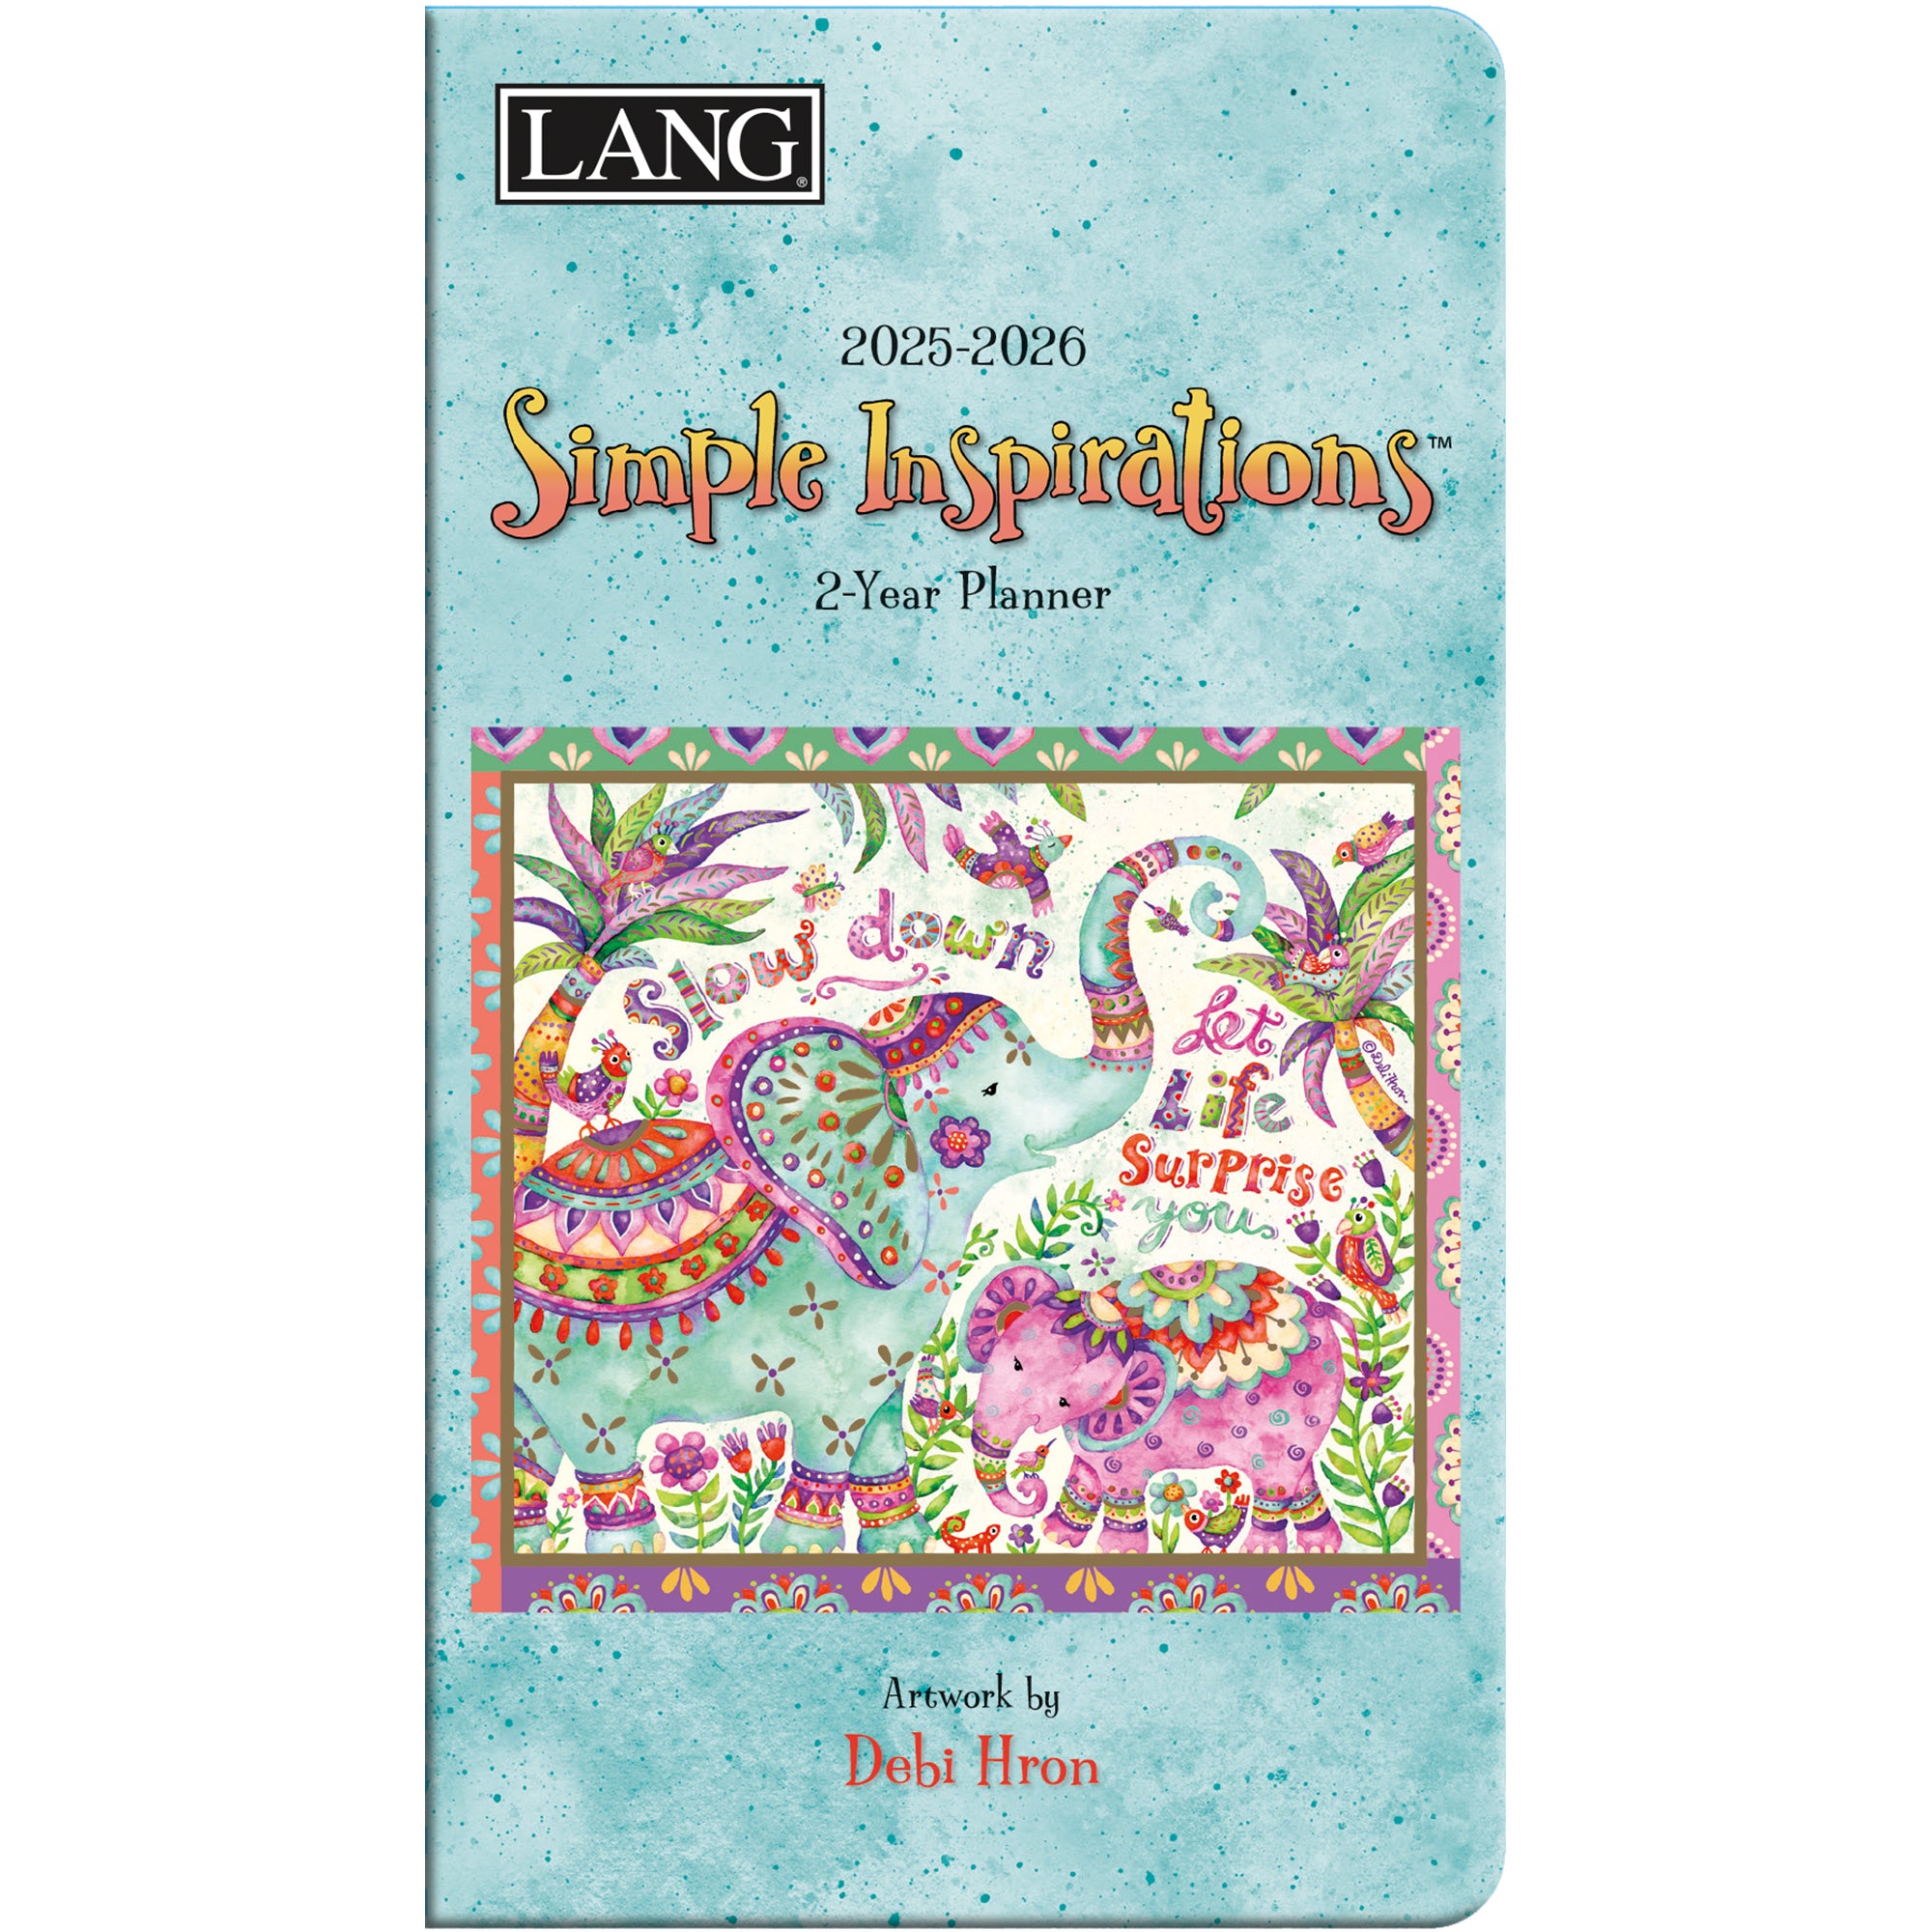 2025-2026 Simple Inspirations - LANG 2 Year Pocket Diary/Planner